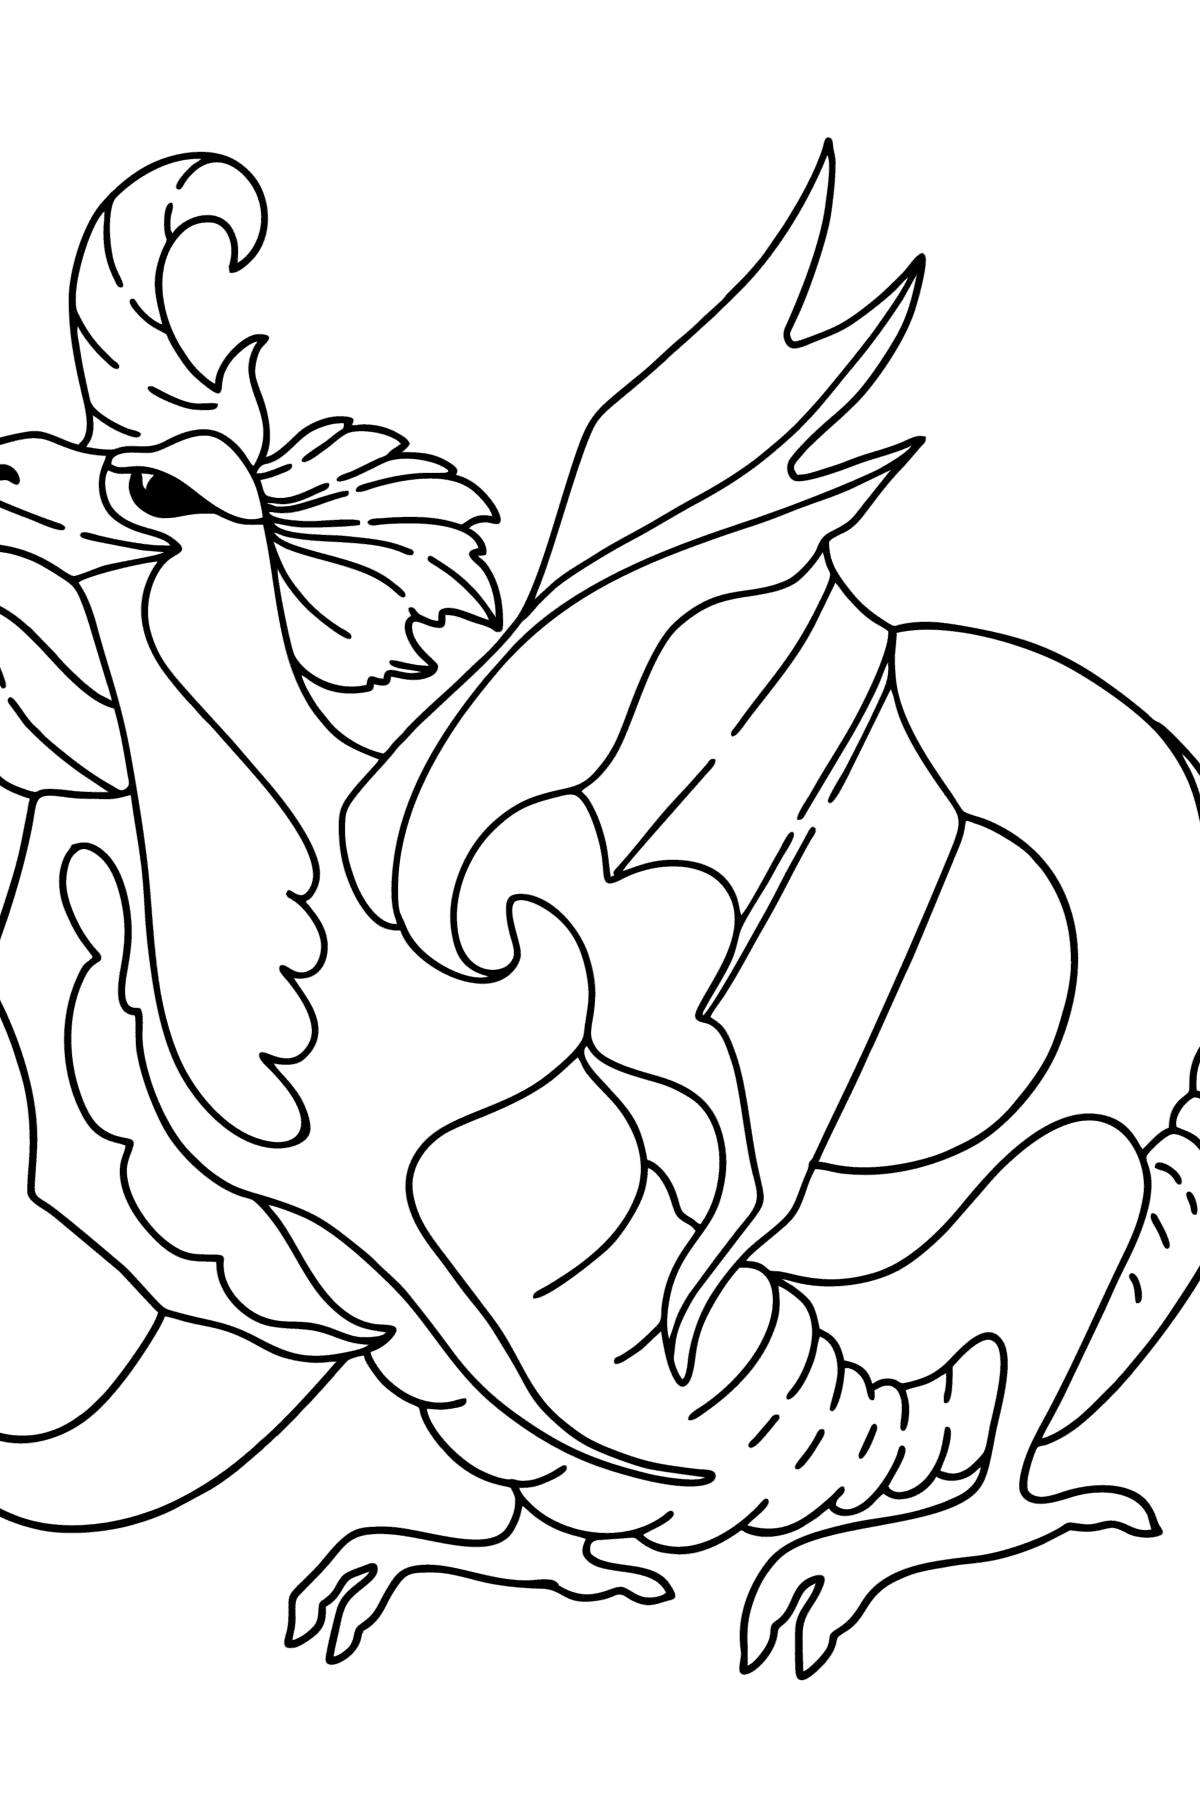 Lucky Dragon coloring page - Coloring Pages for Kids